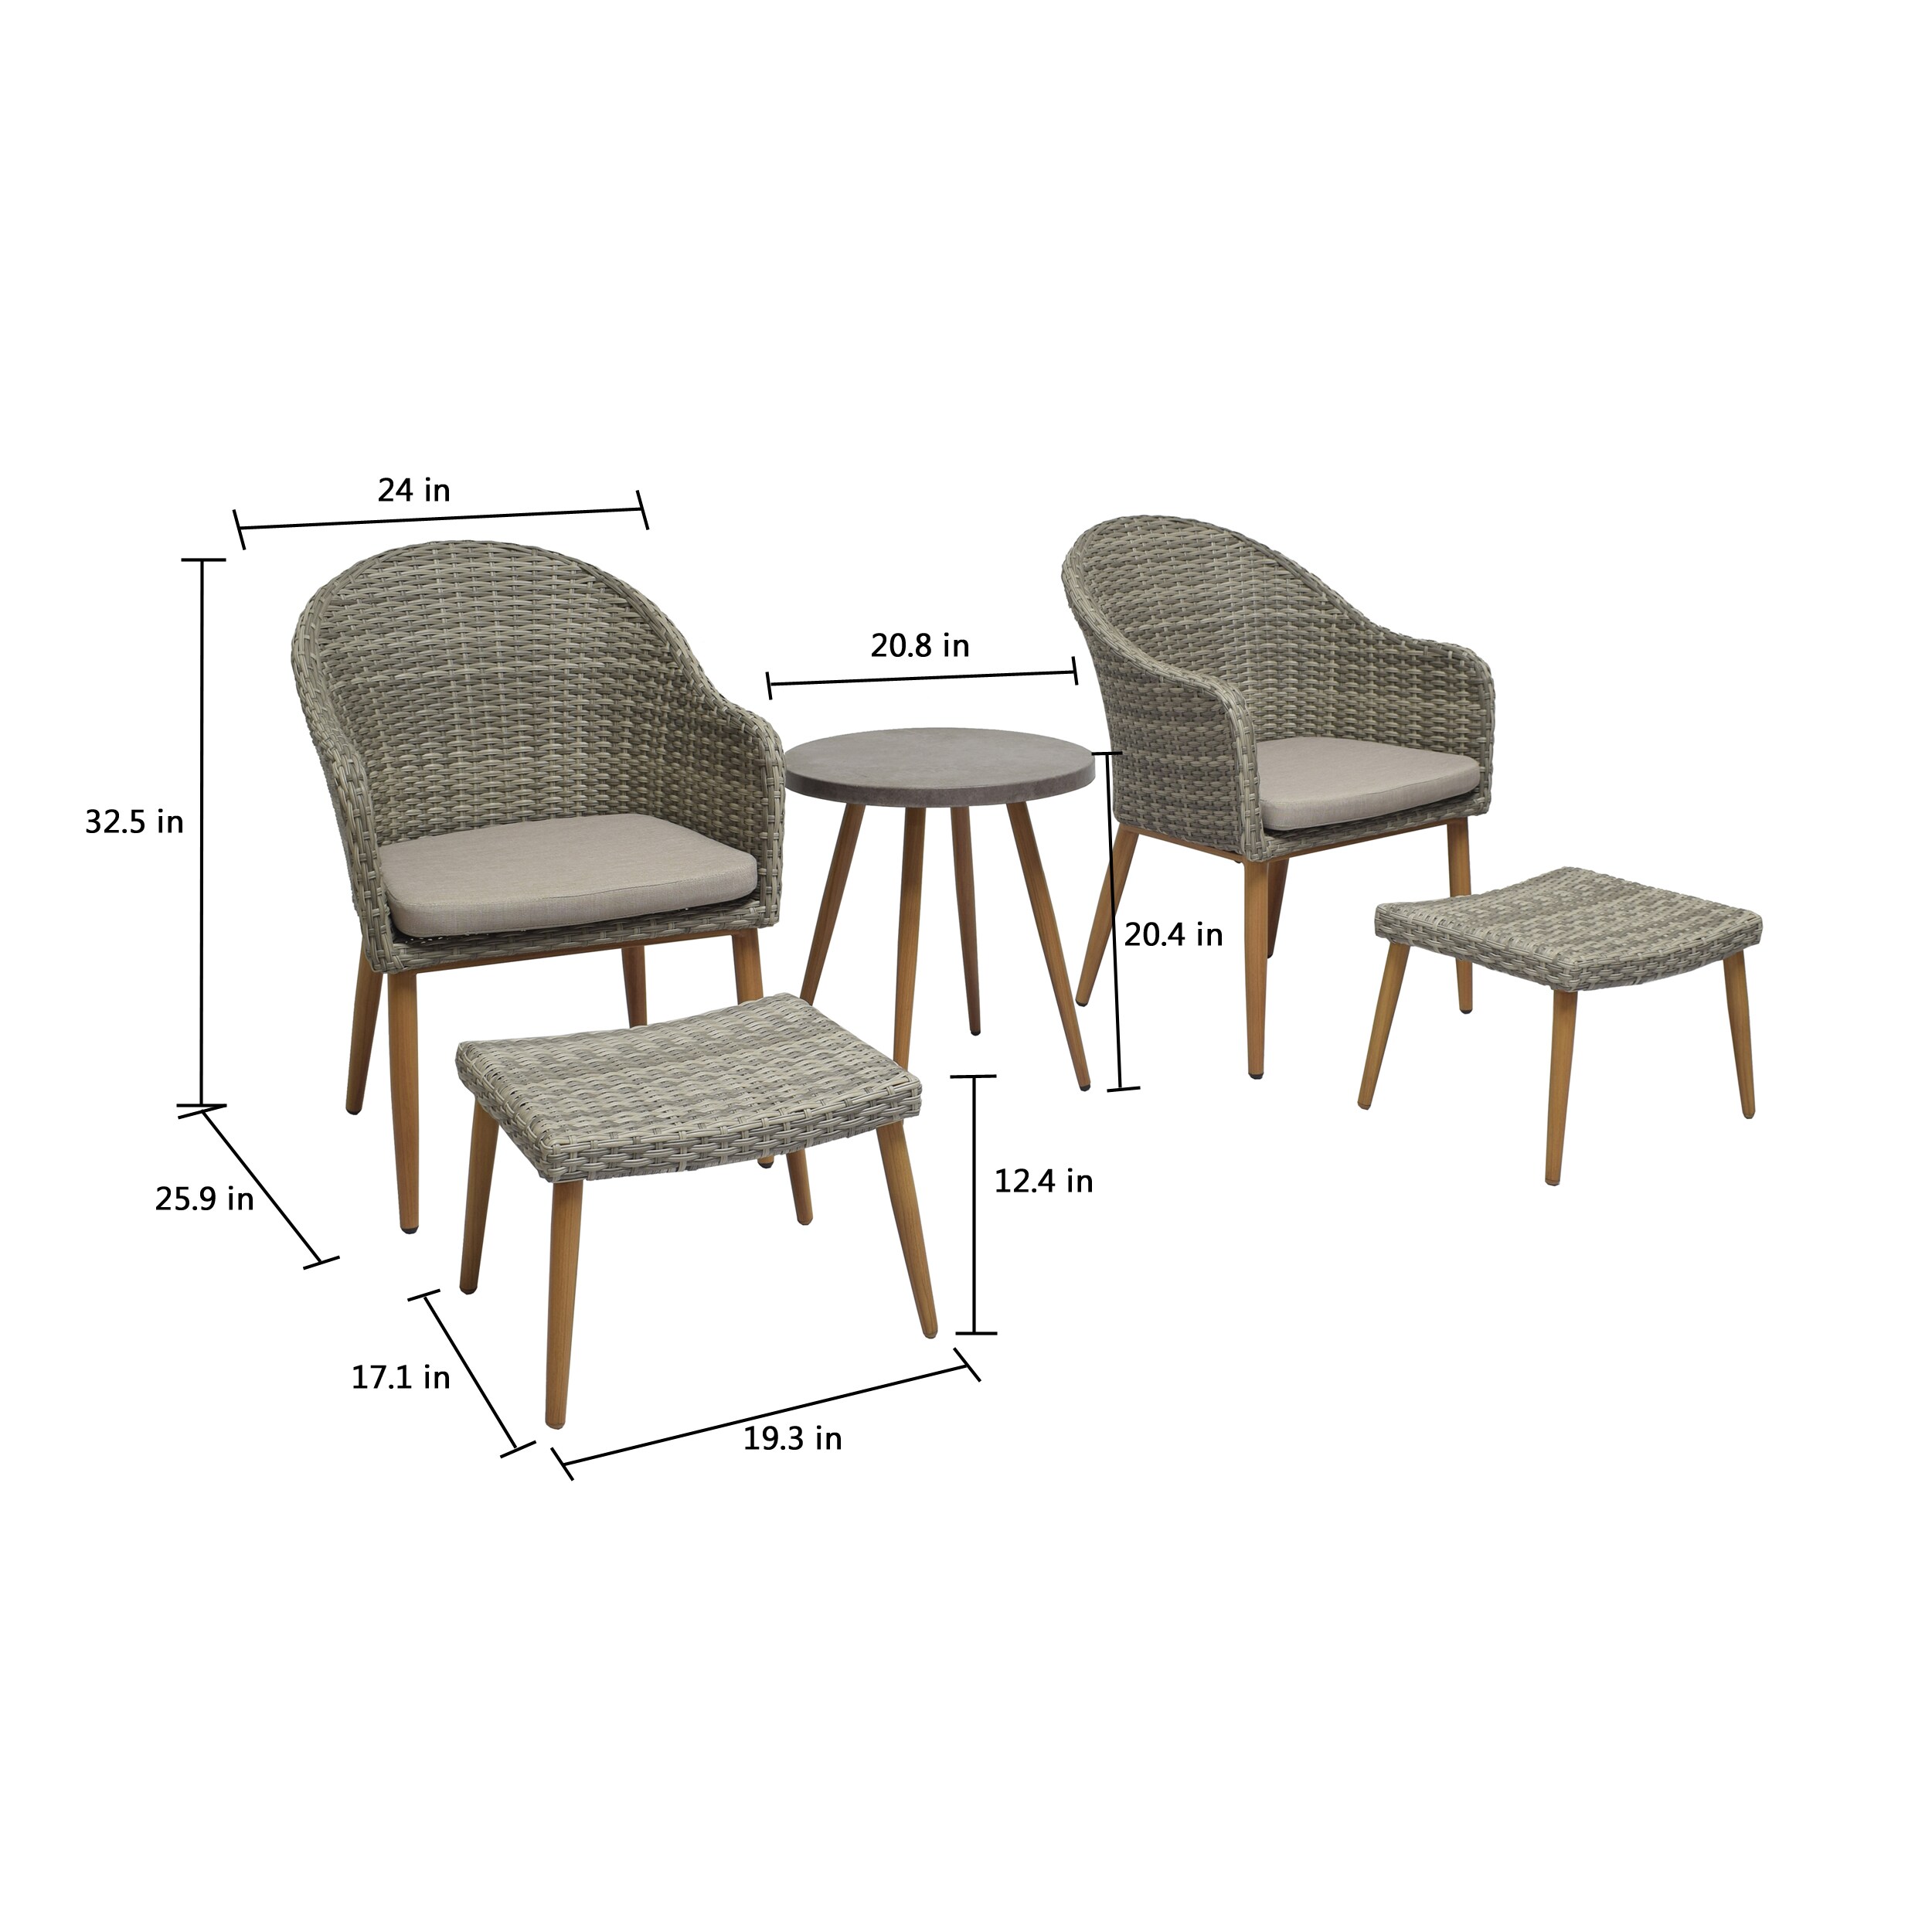 Set 5-Piece Conversation Selections with Hembstead at Wicker Off-white Patio Style Cushions